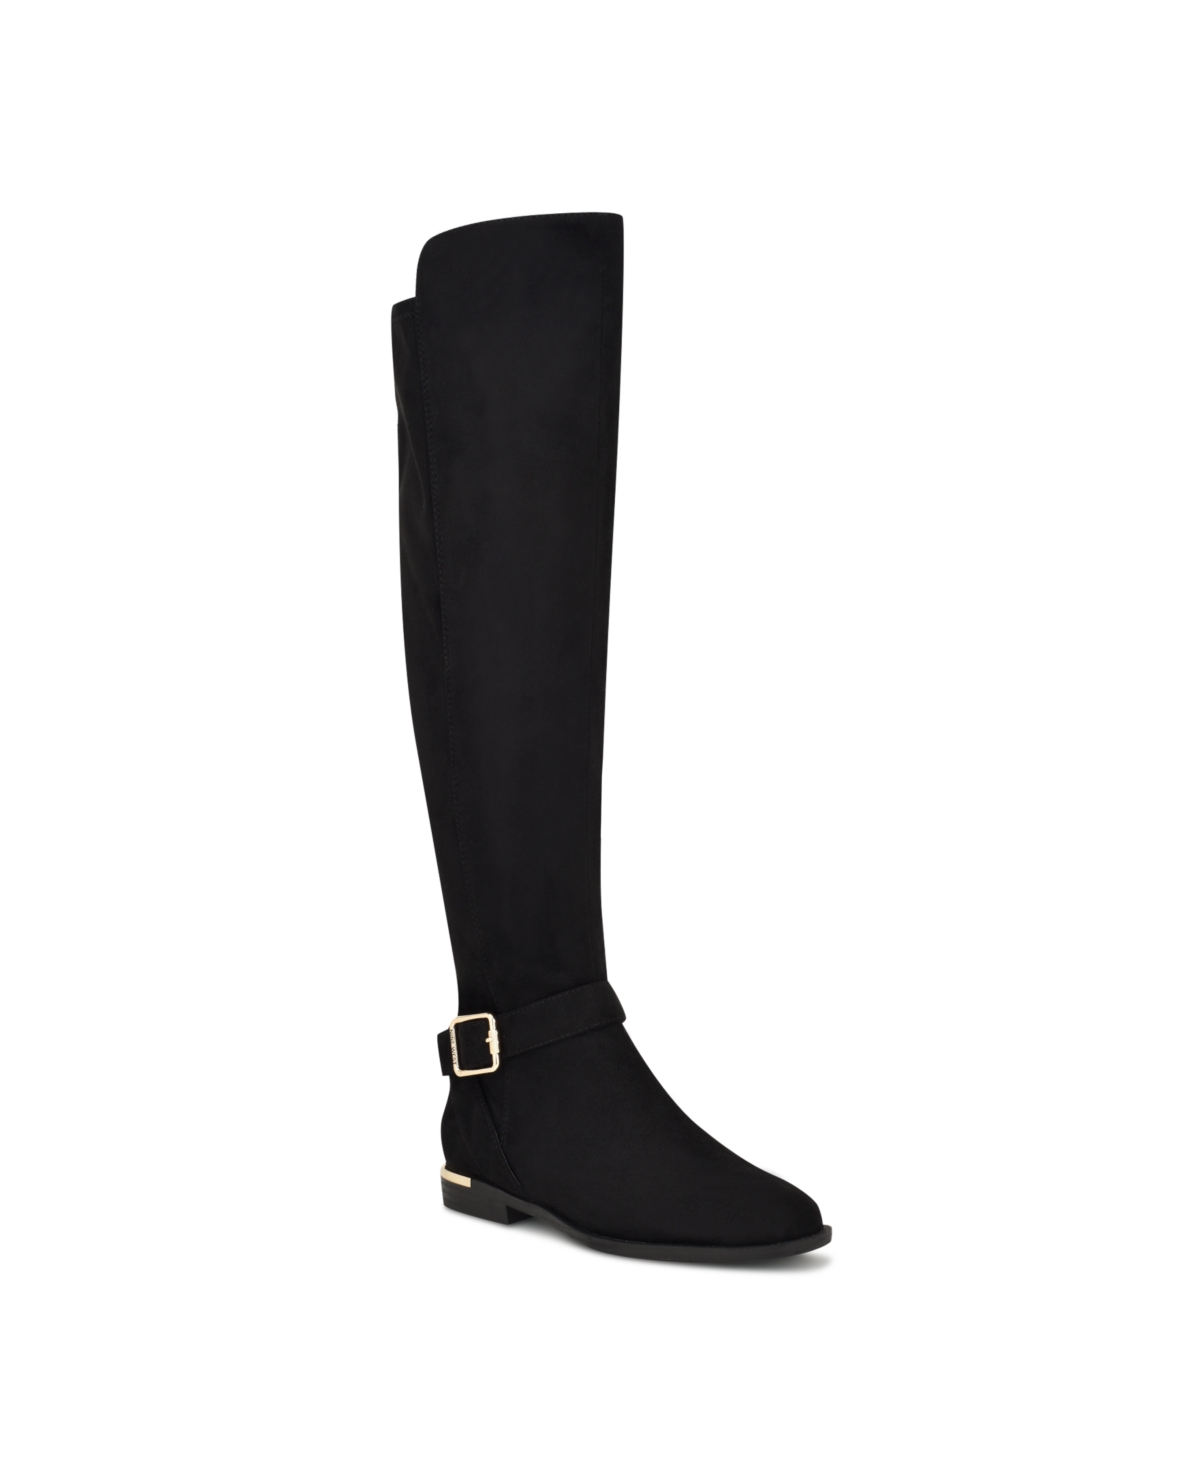 NINE WEST WOMEN'S ANDONE ROUND TOE OVER THE KNEE CASUAL WIDE CALF BOOTS